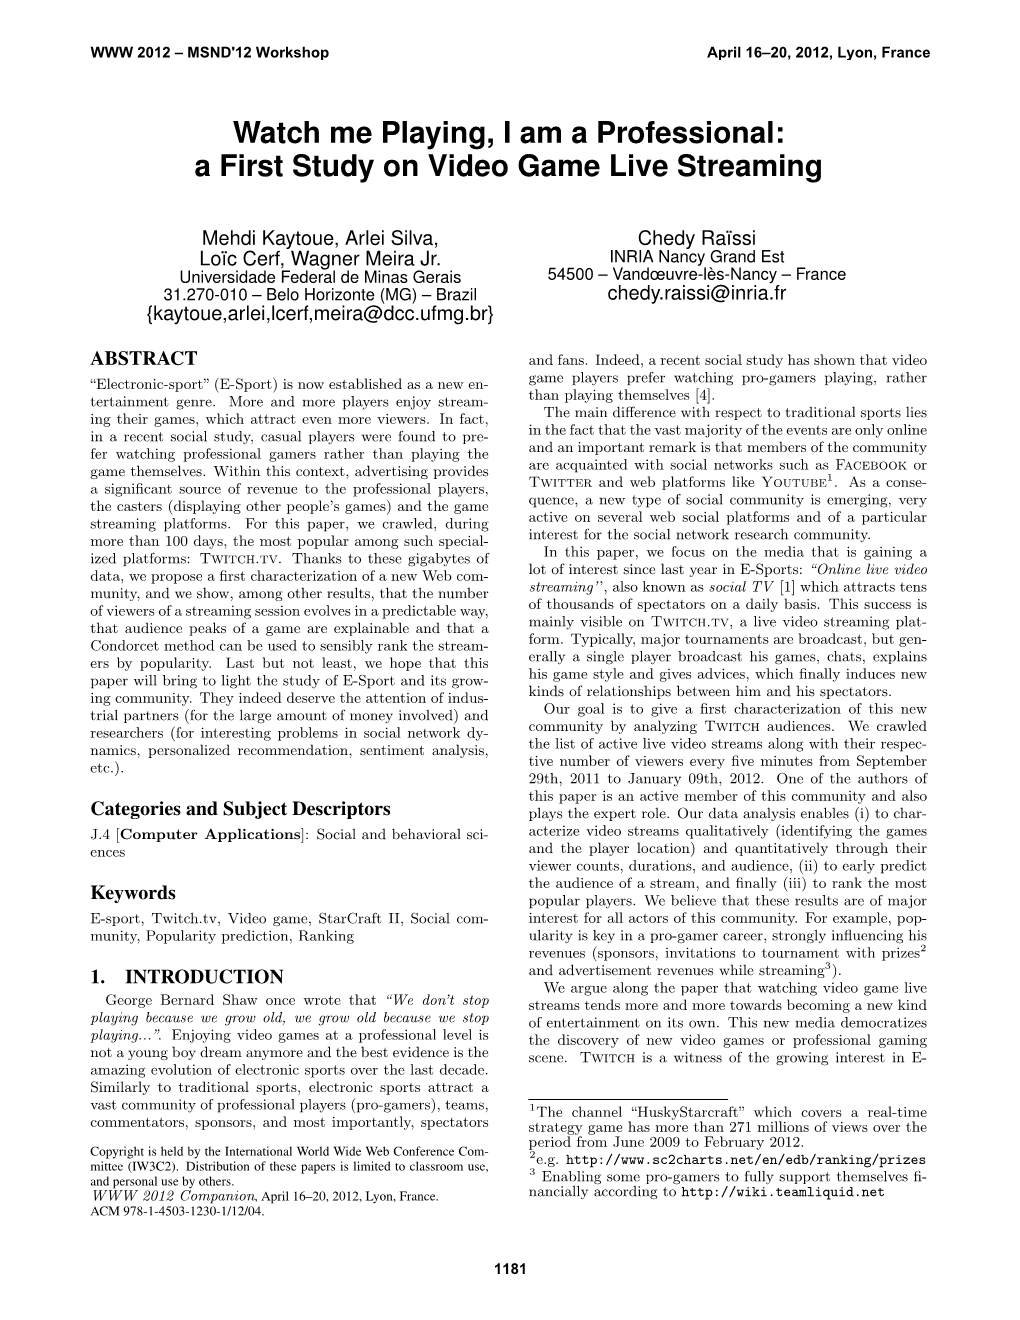 Watch Me Playing, I Am a Professional: a First Study on Video Game Live Streaming